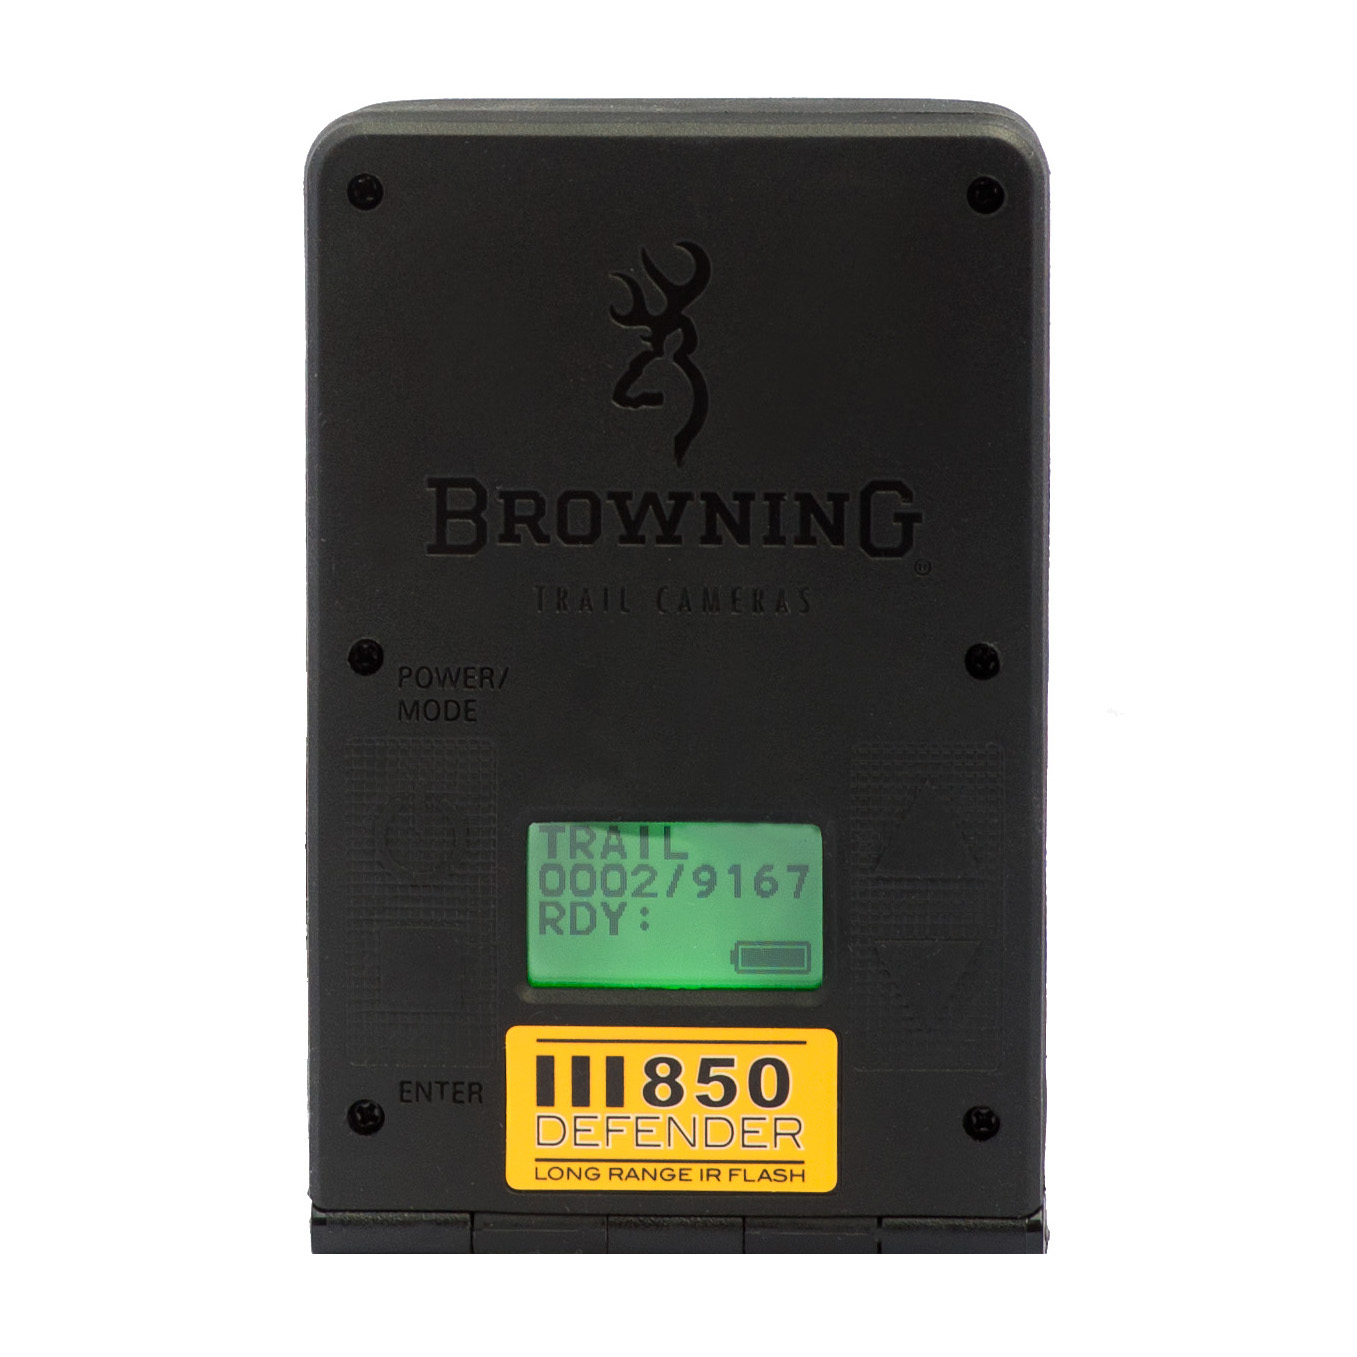 Browning Defender 850 Wifi/Bluetooth 20MP Trail Game Security Camera - BTC-9D - image 4 of 5